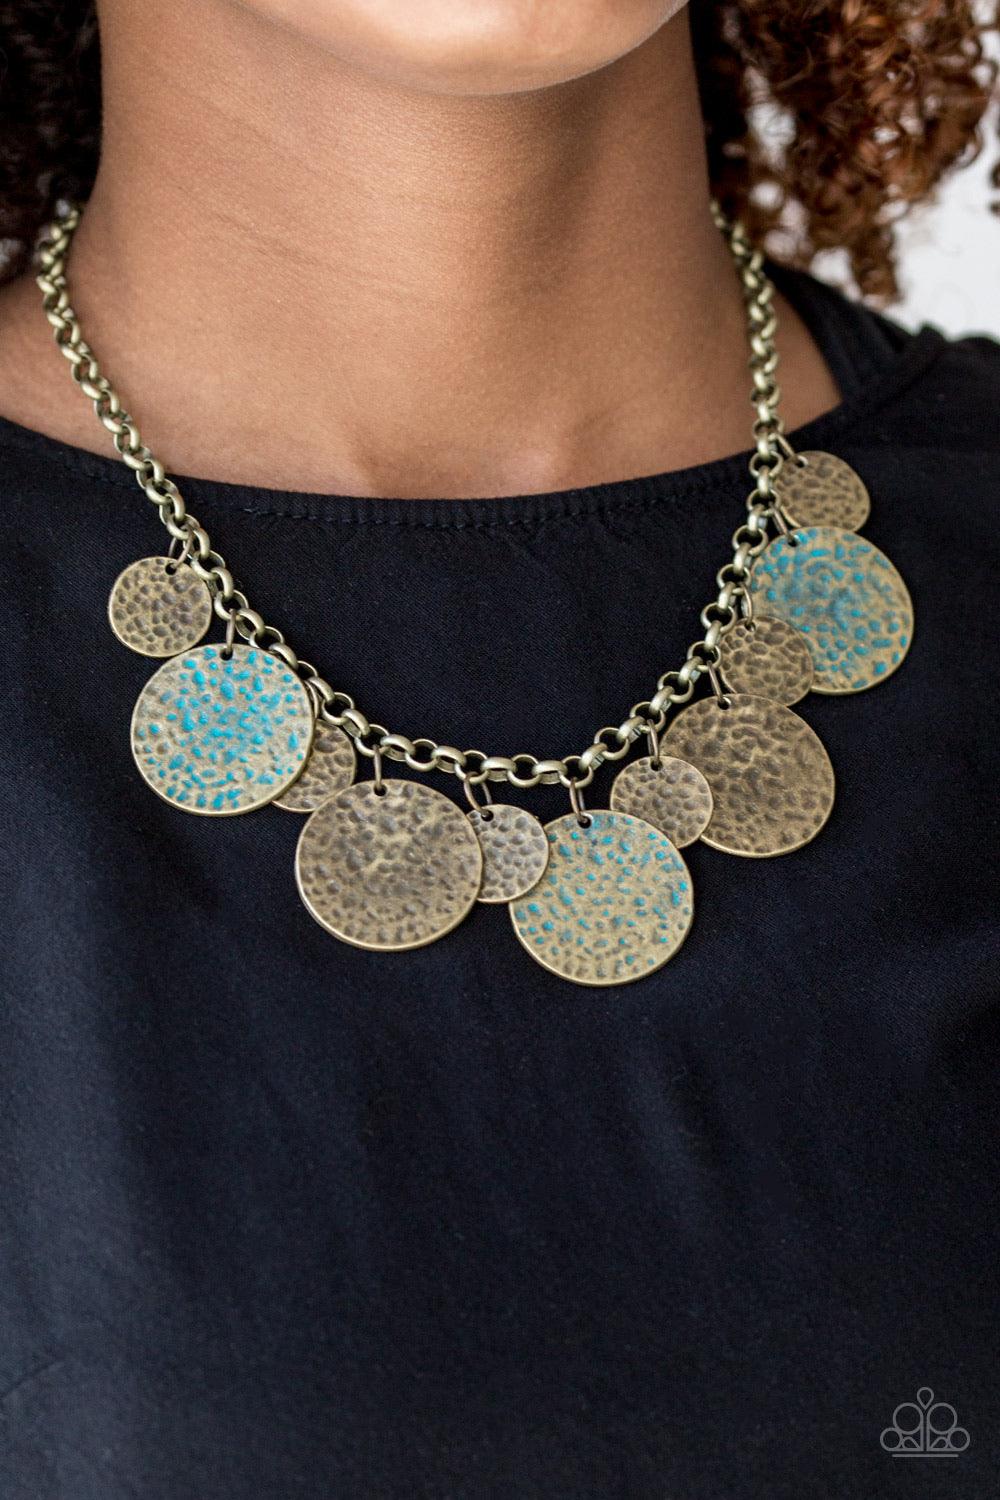 Paparazzi Accessories Treasure HUNTRESS - Brass Delicately hammered in antiqued textures, small and large brass discs alternate below the collar. Three brass discs are brushed in a patina finish for a colorful rustic finish. Features an adjustable clasp c